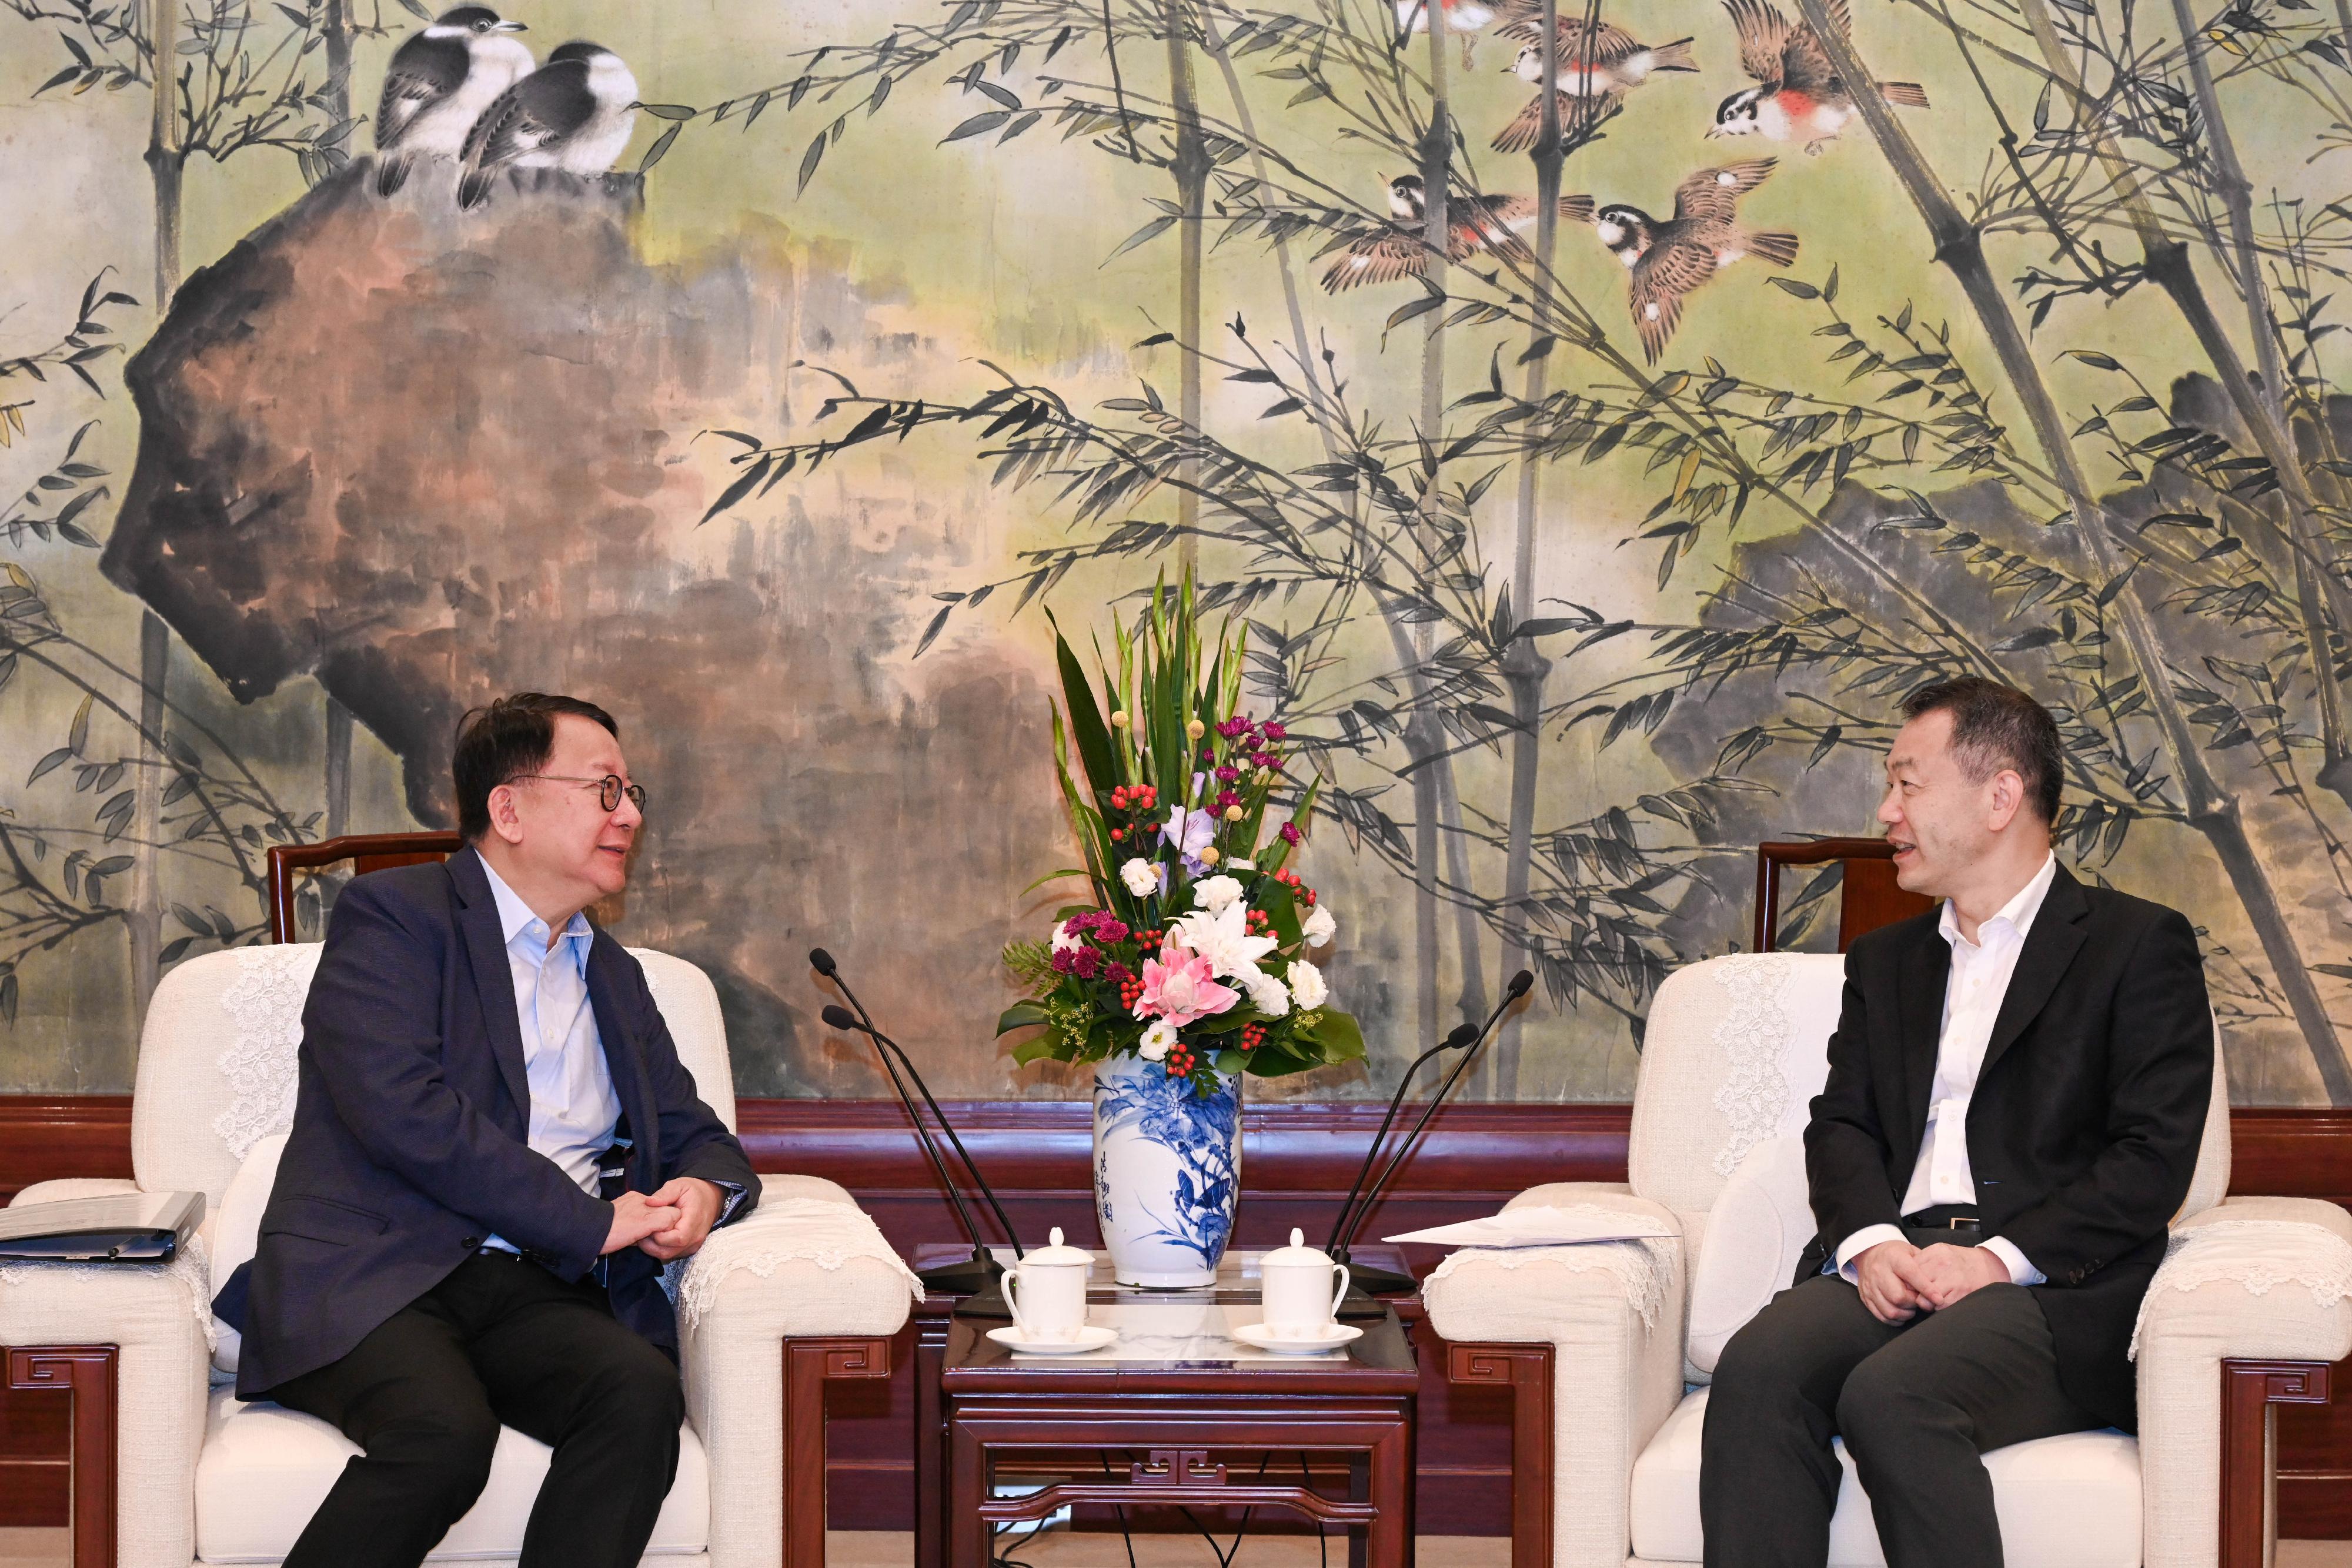 The Chief Secretary for Administration, Mr Chan Kwok-ki, visited Shanghai today (June 25). Photo shows Mr Chan (left) meeting Vice Mayor of Shanghai Mr Chen Jie (right) to discuss issues of mutual concern and strengthen exchanges and co-operation in various aspects.